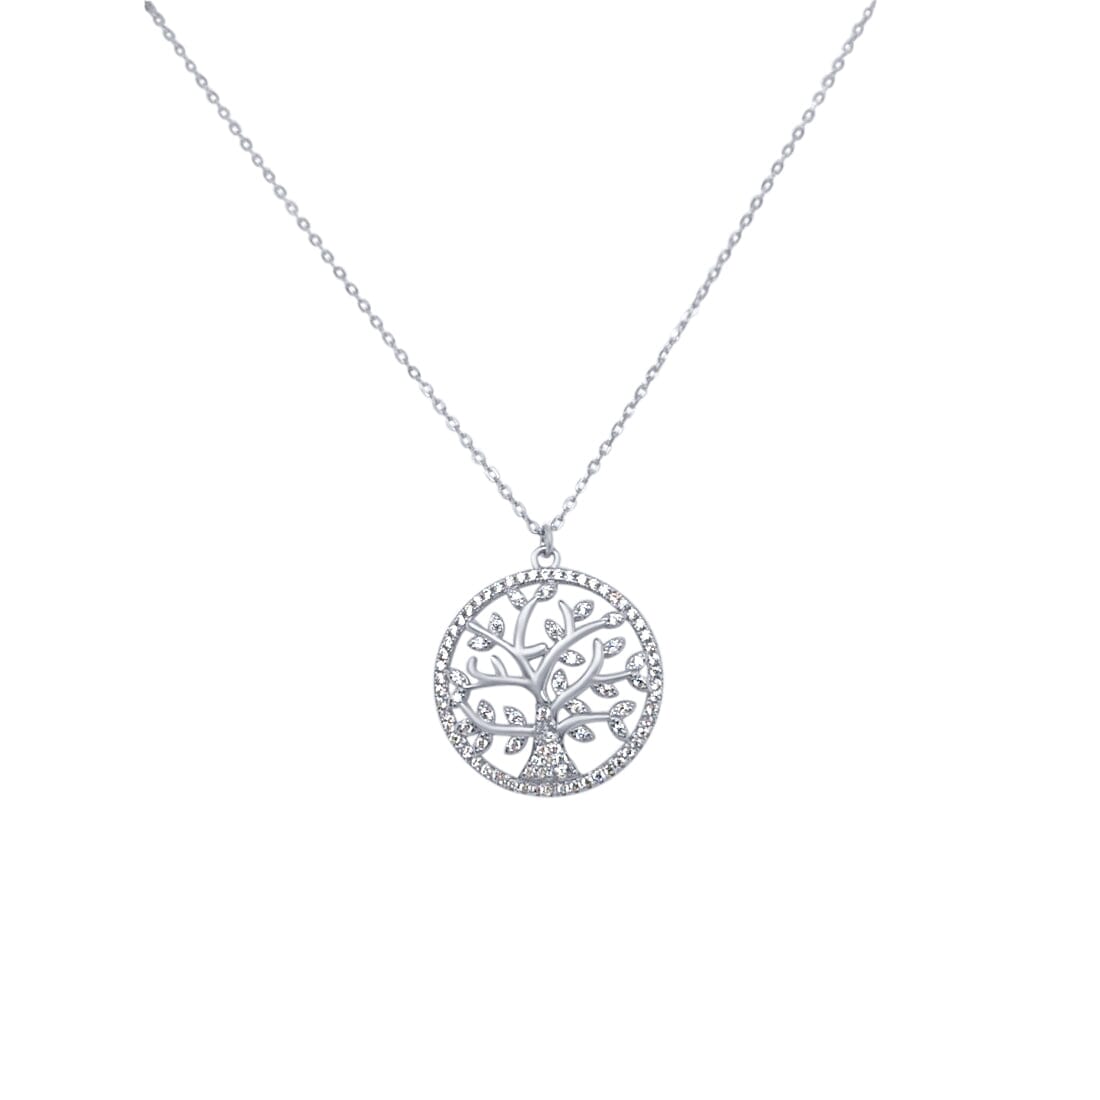 45cm Tree of Life Pendant Necklace with Cubic Zirconia in Sterling Silver Necklaces Bevilles 